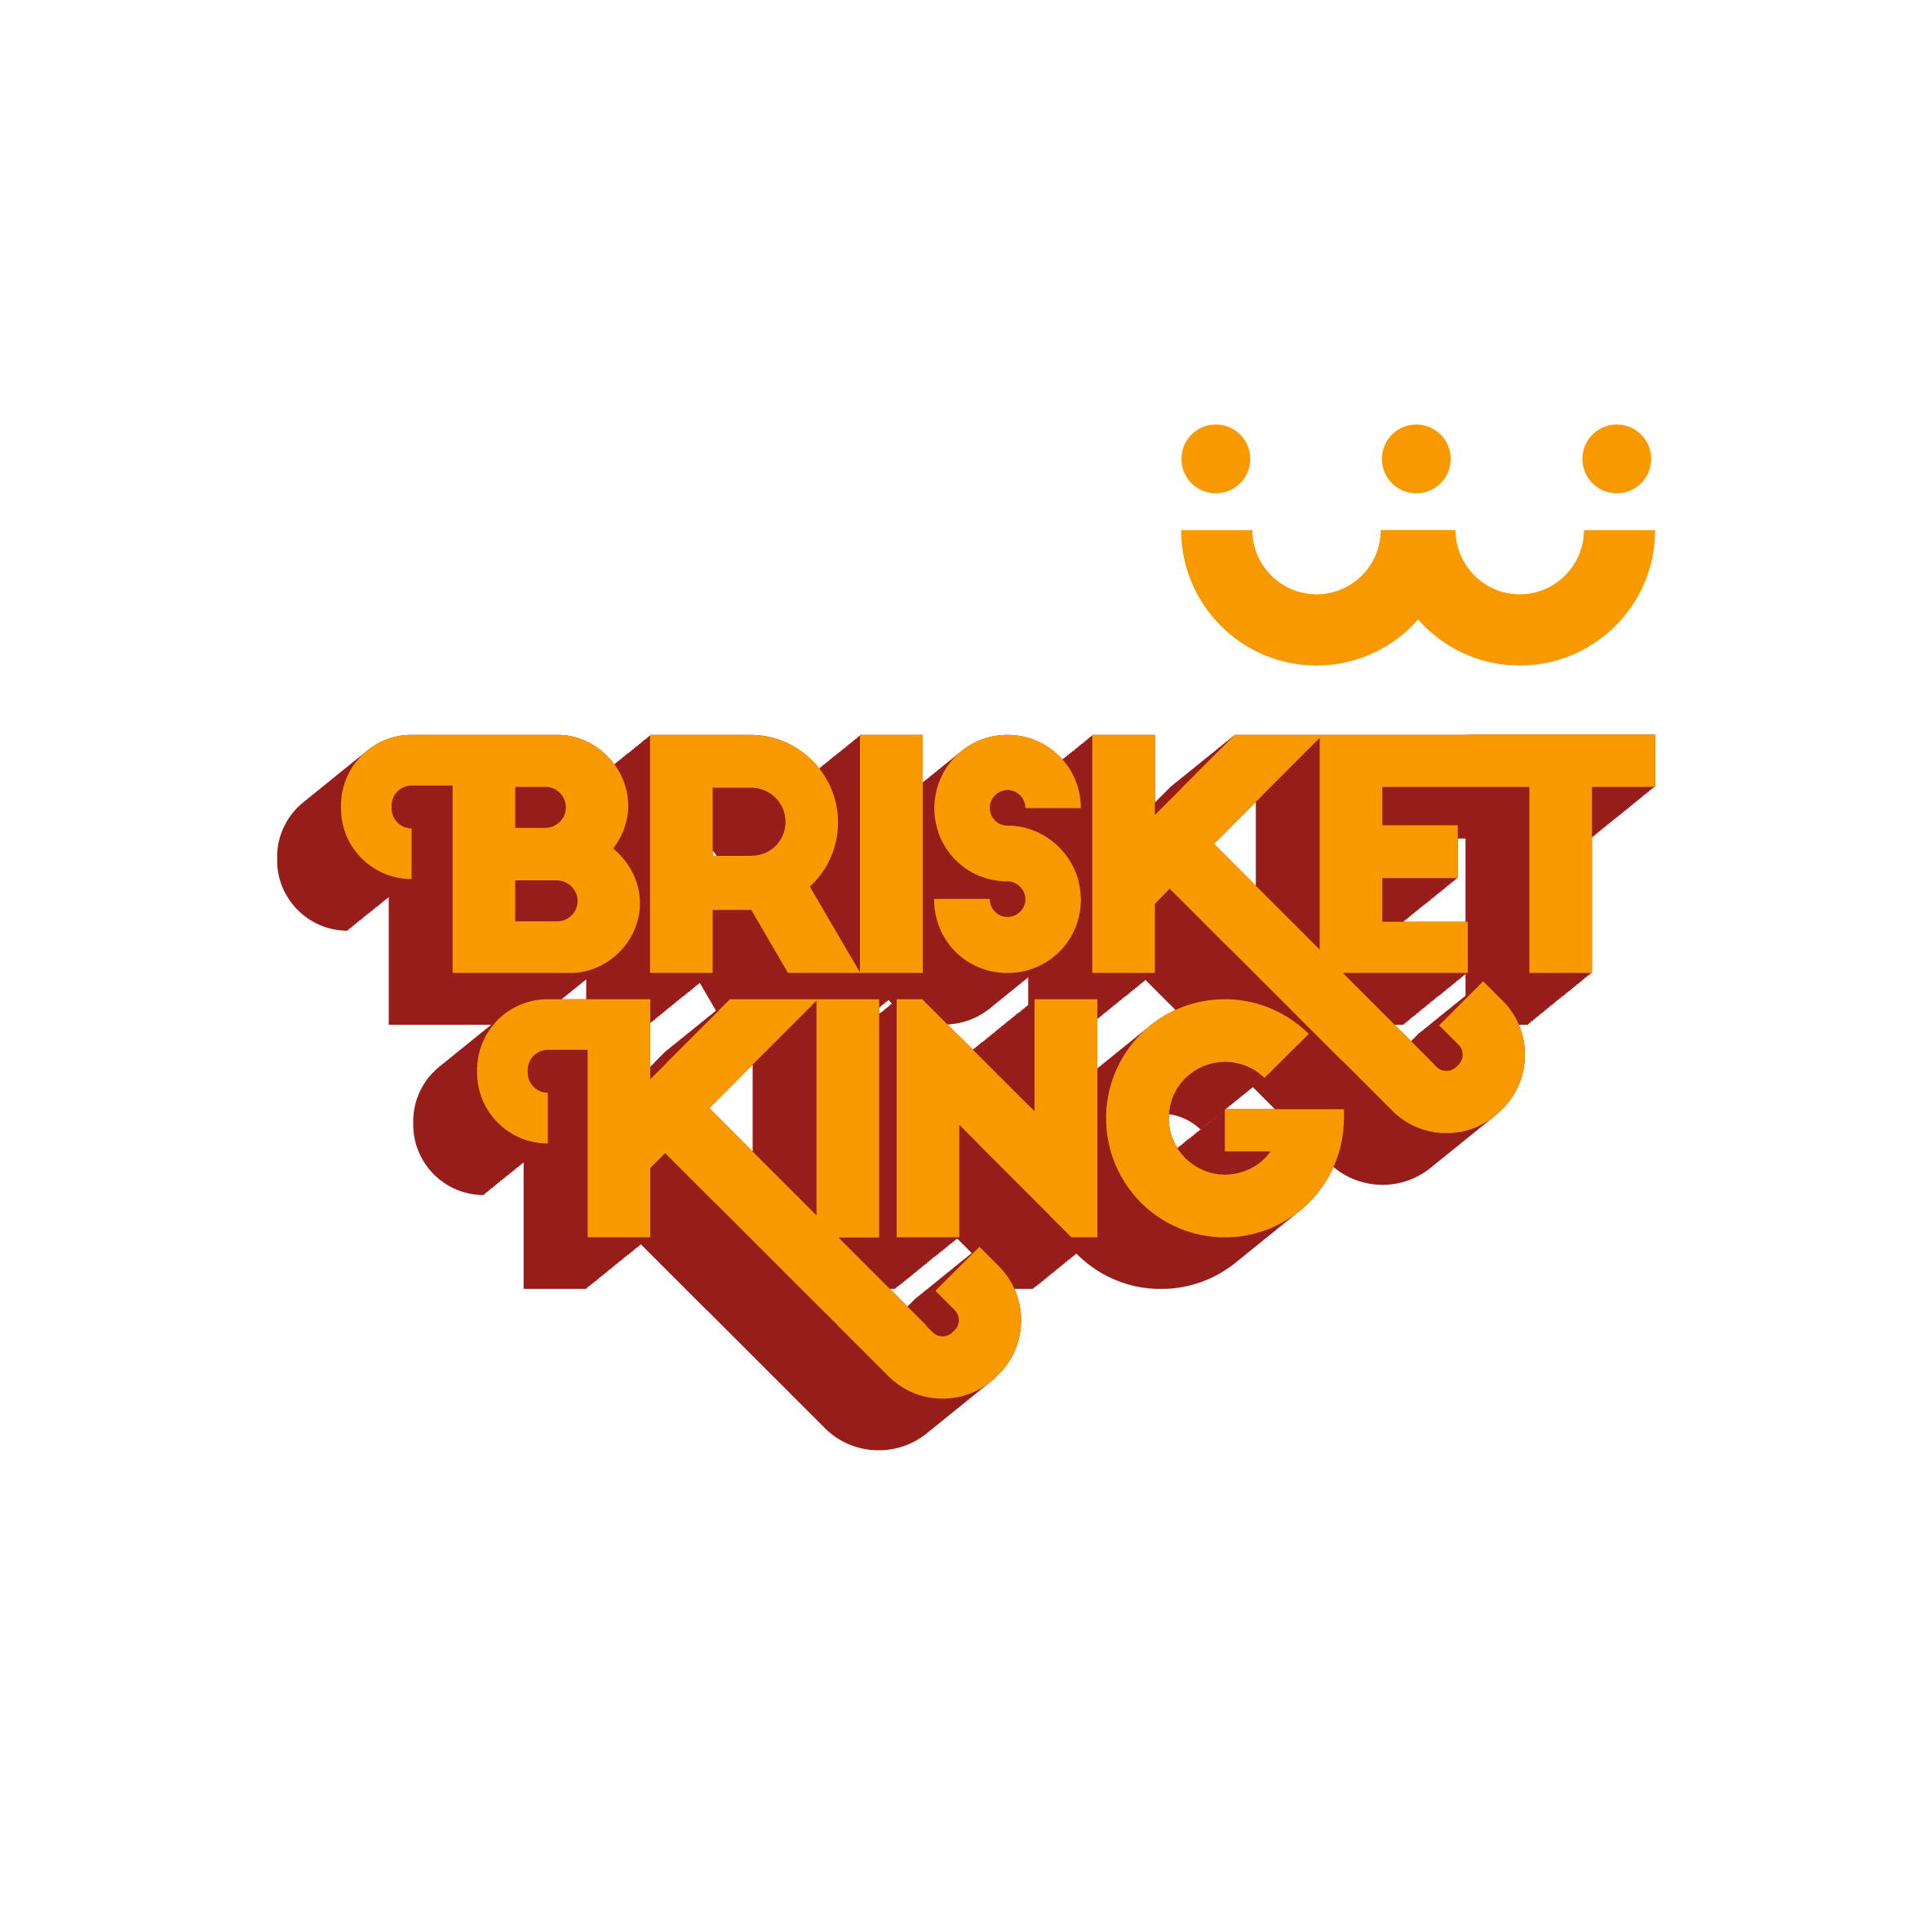 Brisket King  logo design by logo designer Fattah Setiawan for your inspiration and for the worlds largest logo competition